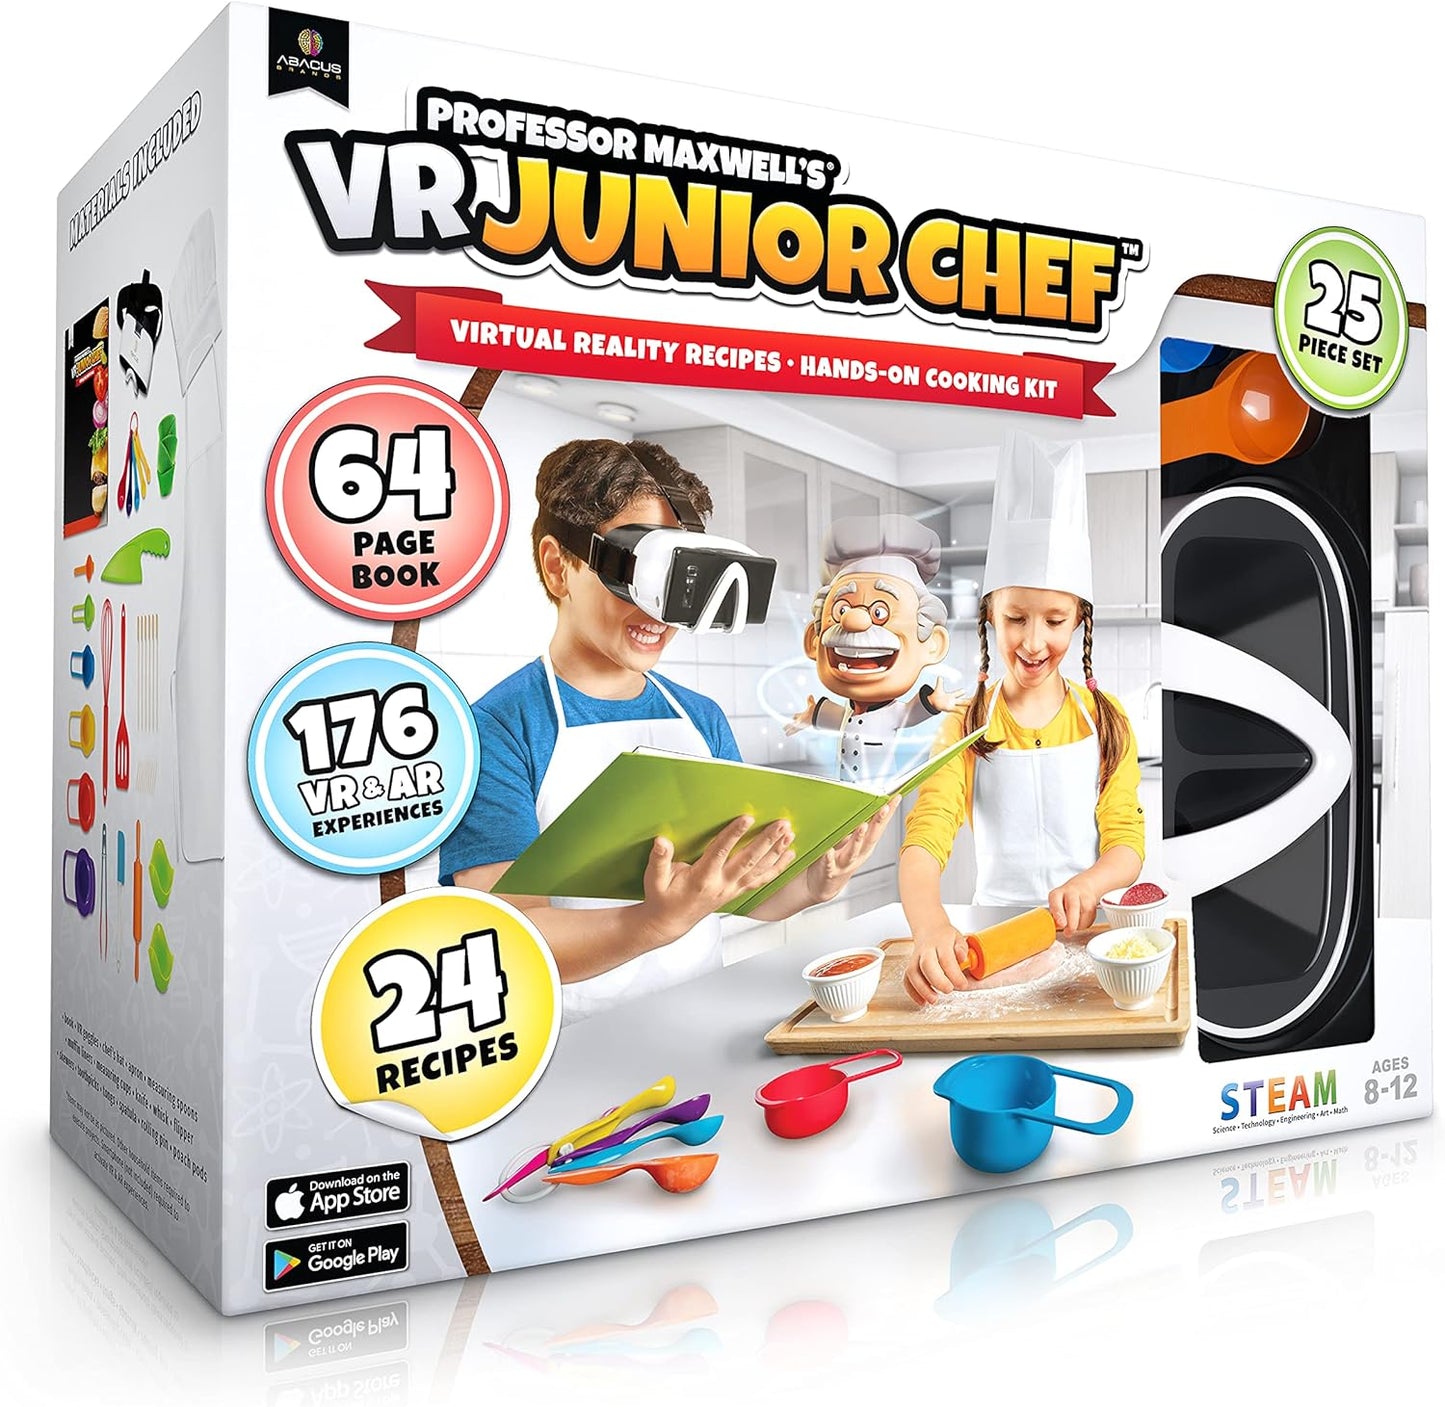 Professor Maxwell's VR Junior Chef Virtual Reality Kids Cookbook and Interact